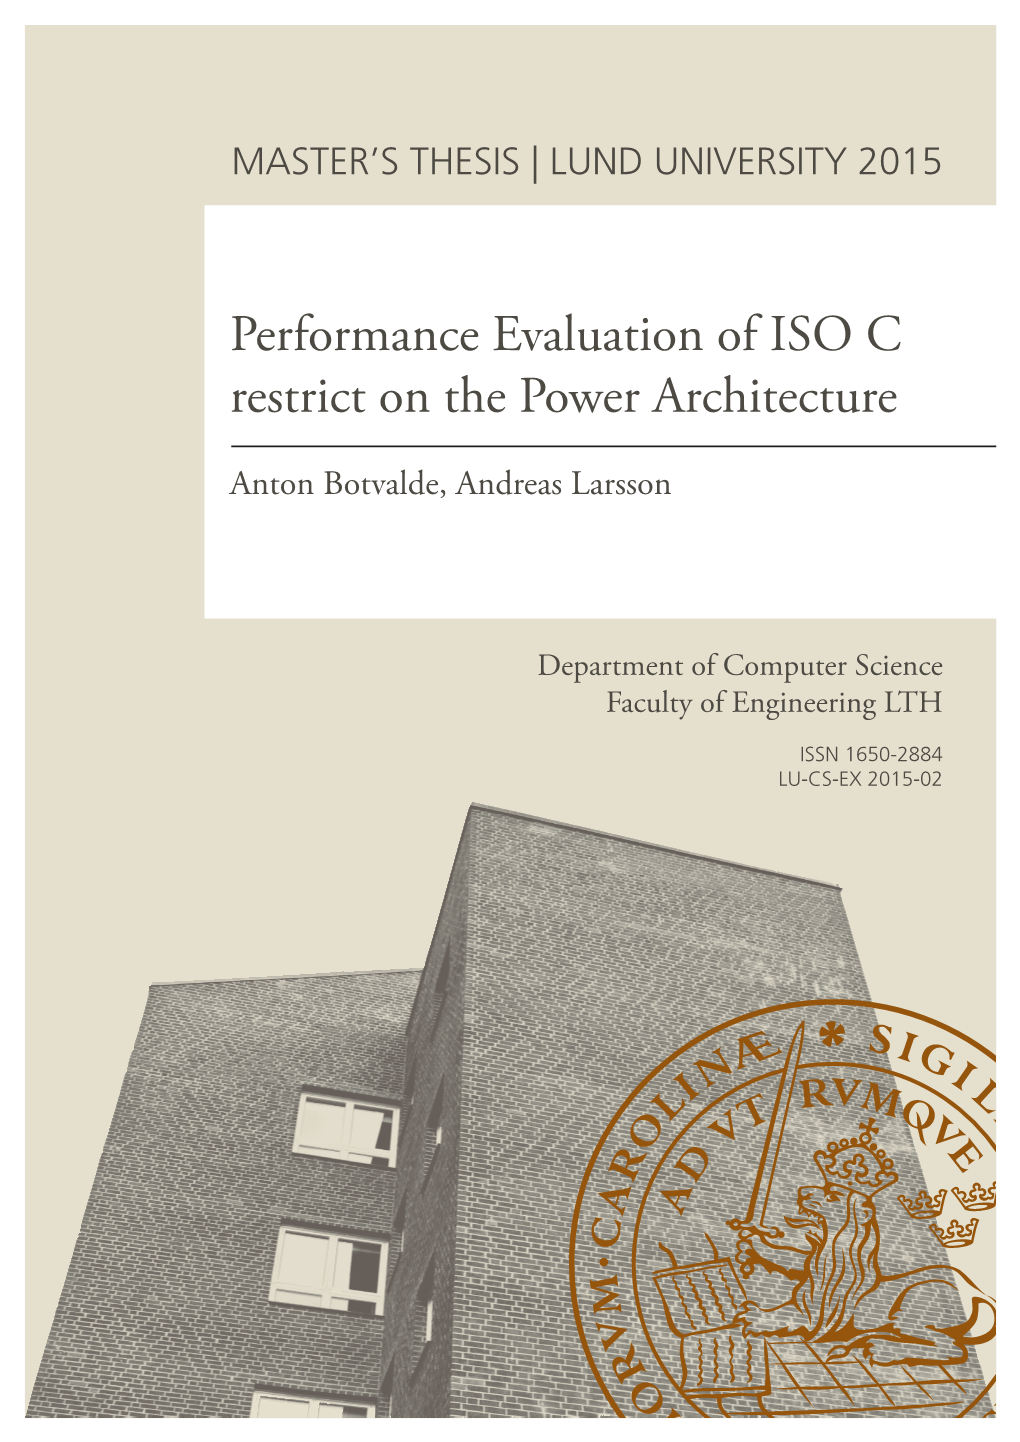 Performance Evaluation of ISO C Restrict on the Power Architecture